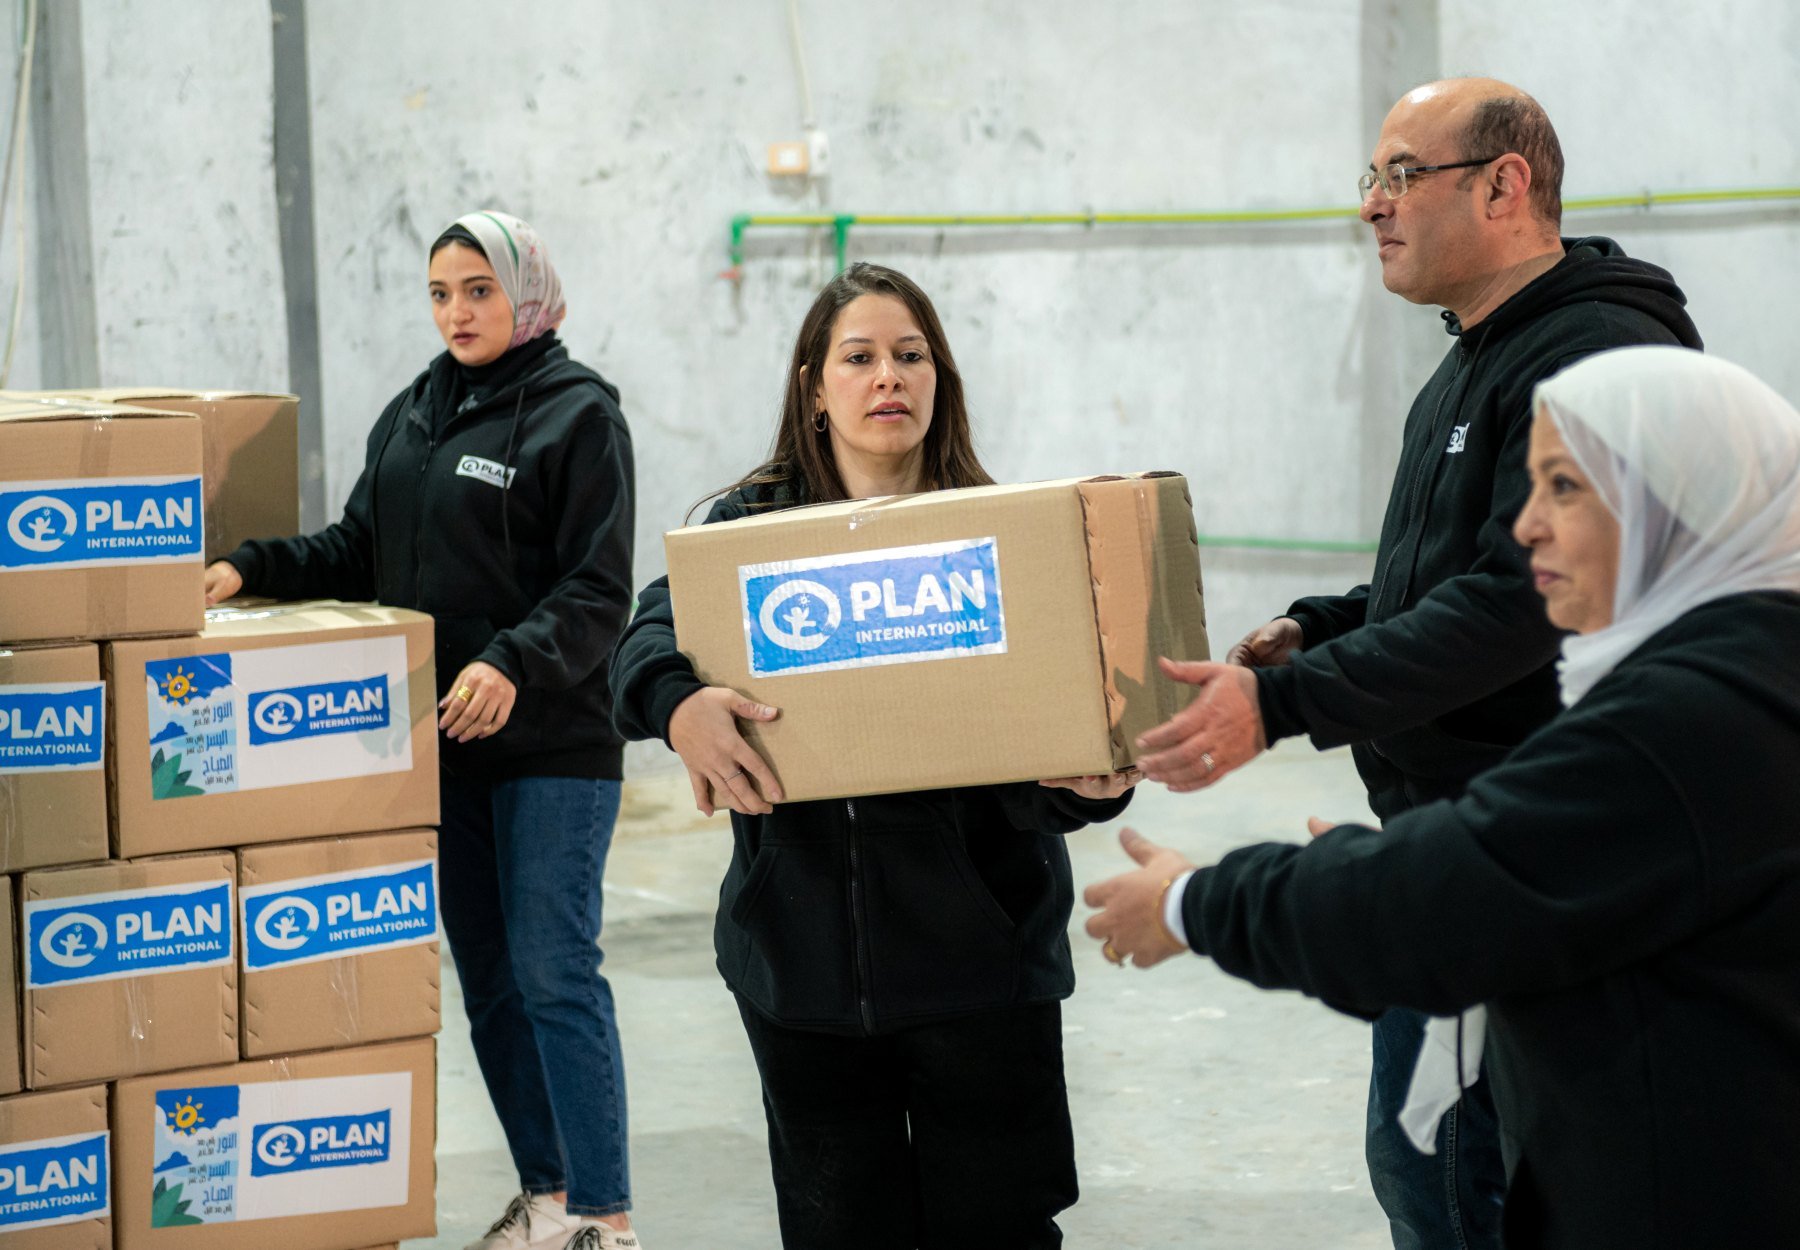 Plan staff in Egypt prepare boxes of first aid kits ready for transport to Gaza (1)